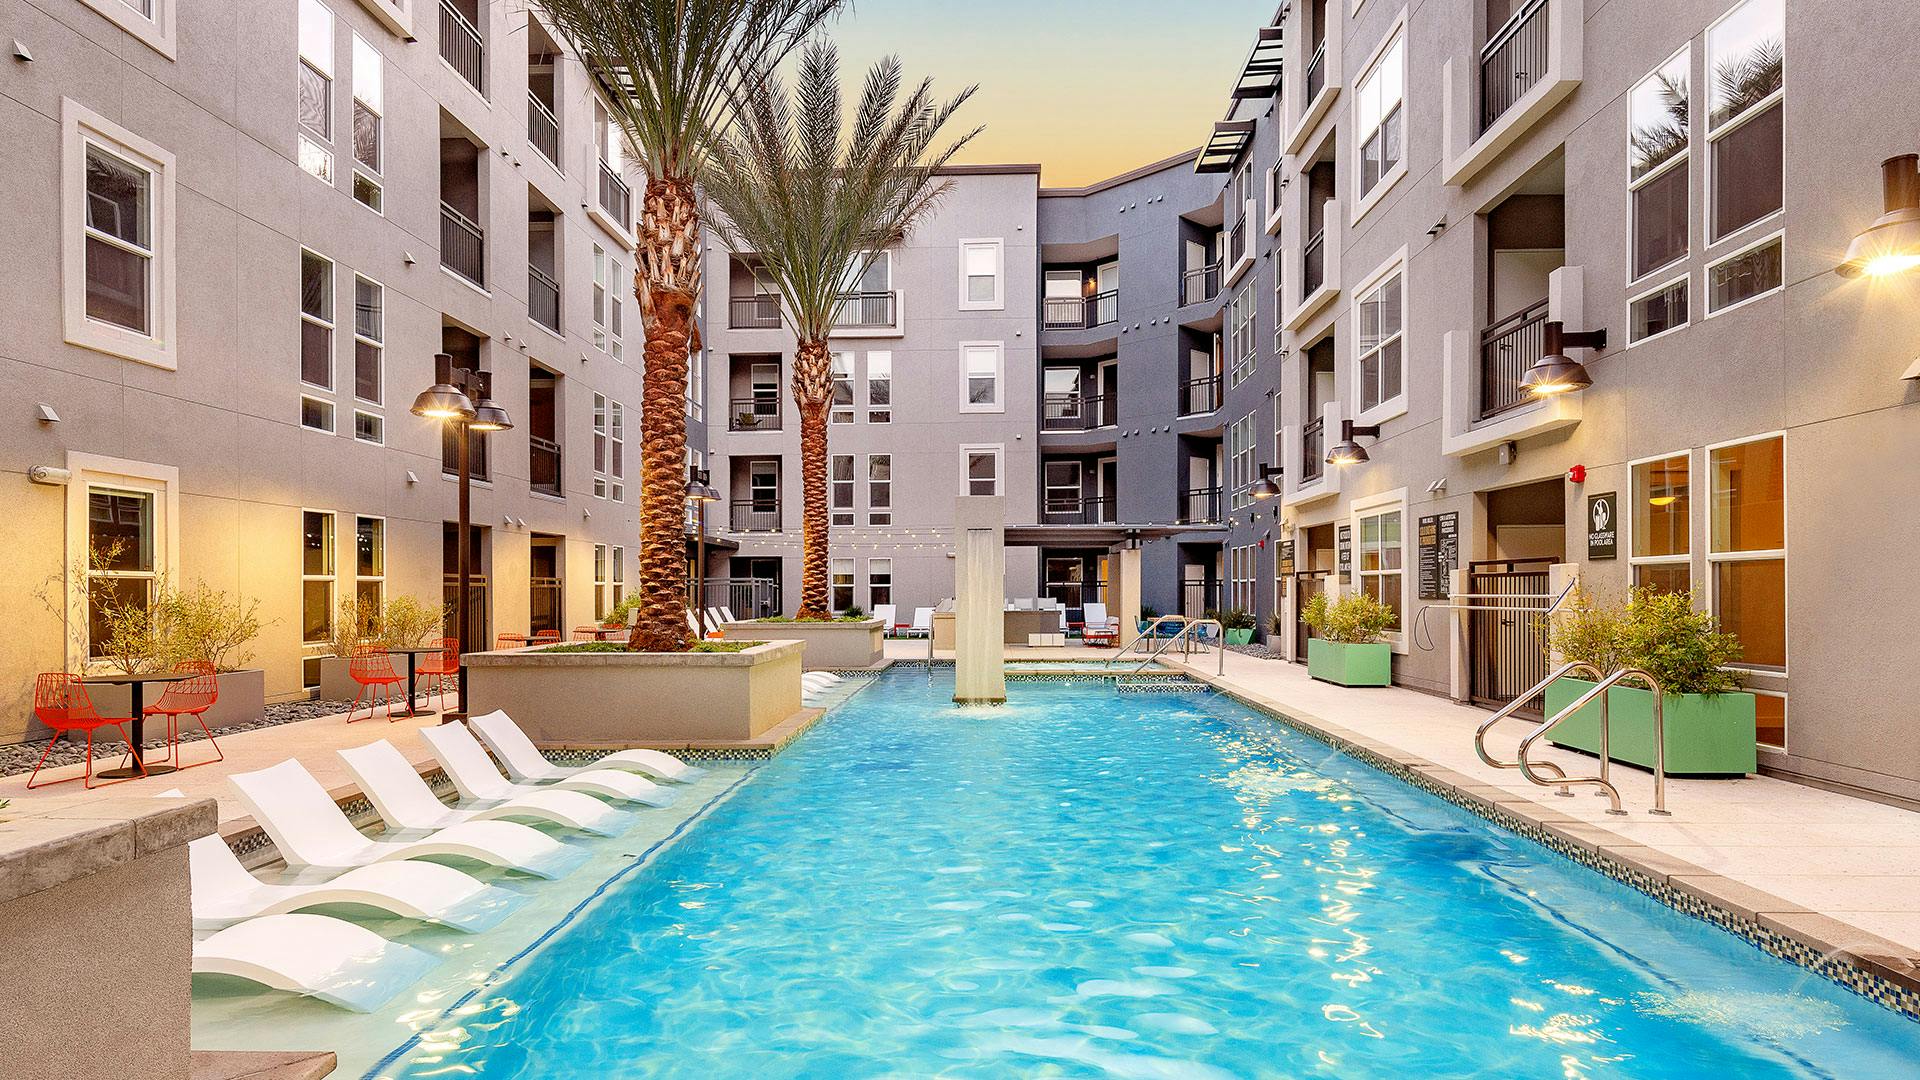 Swimming Pool at Ely on Fremont - Downtown Las Vegas Apartments